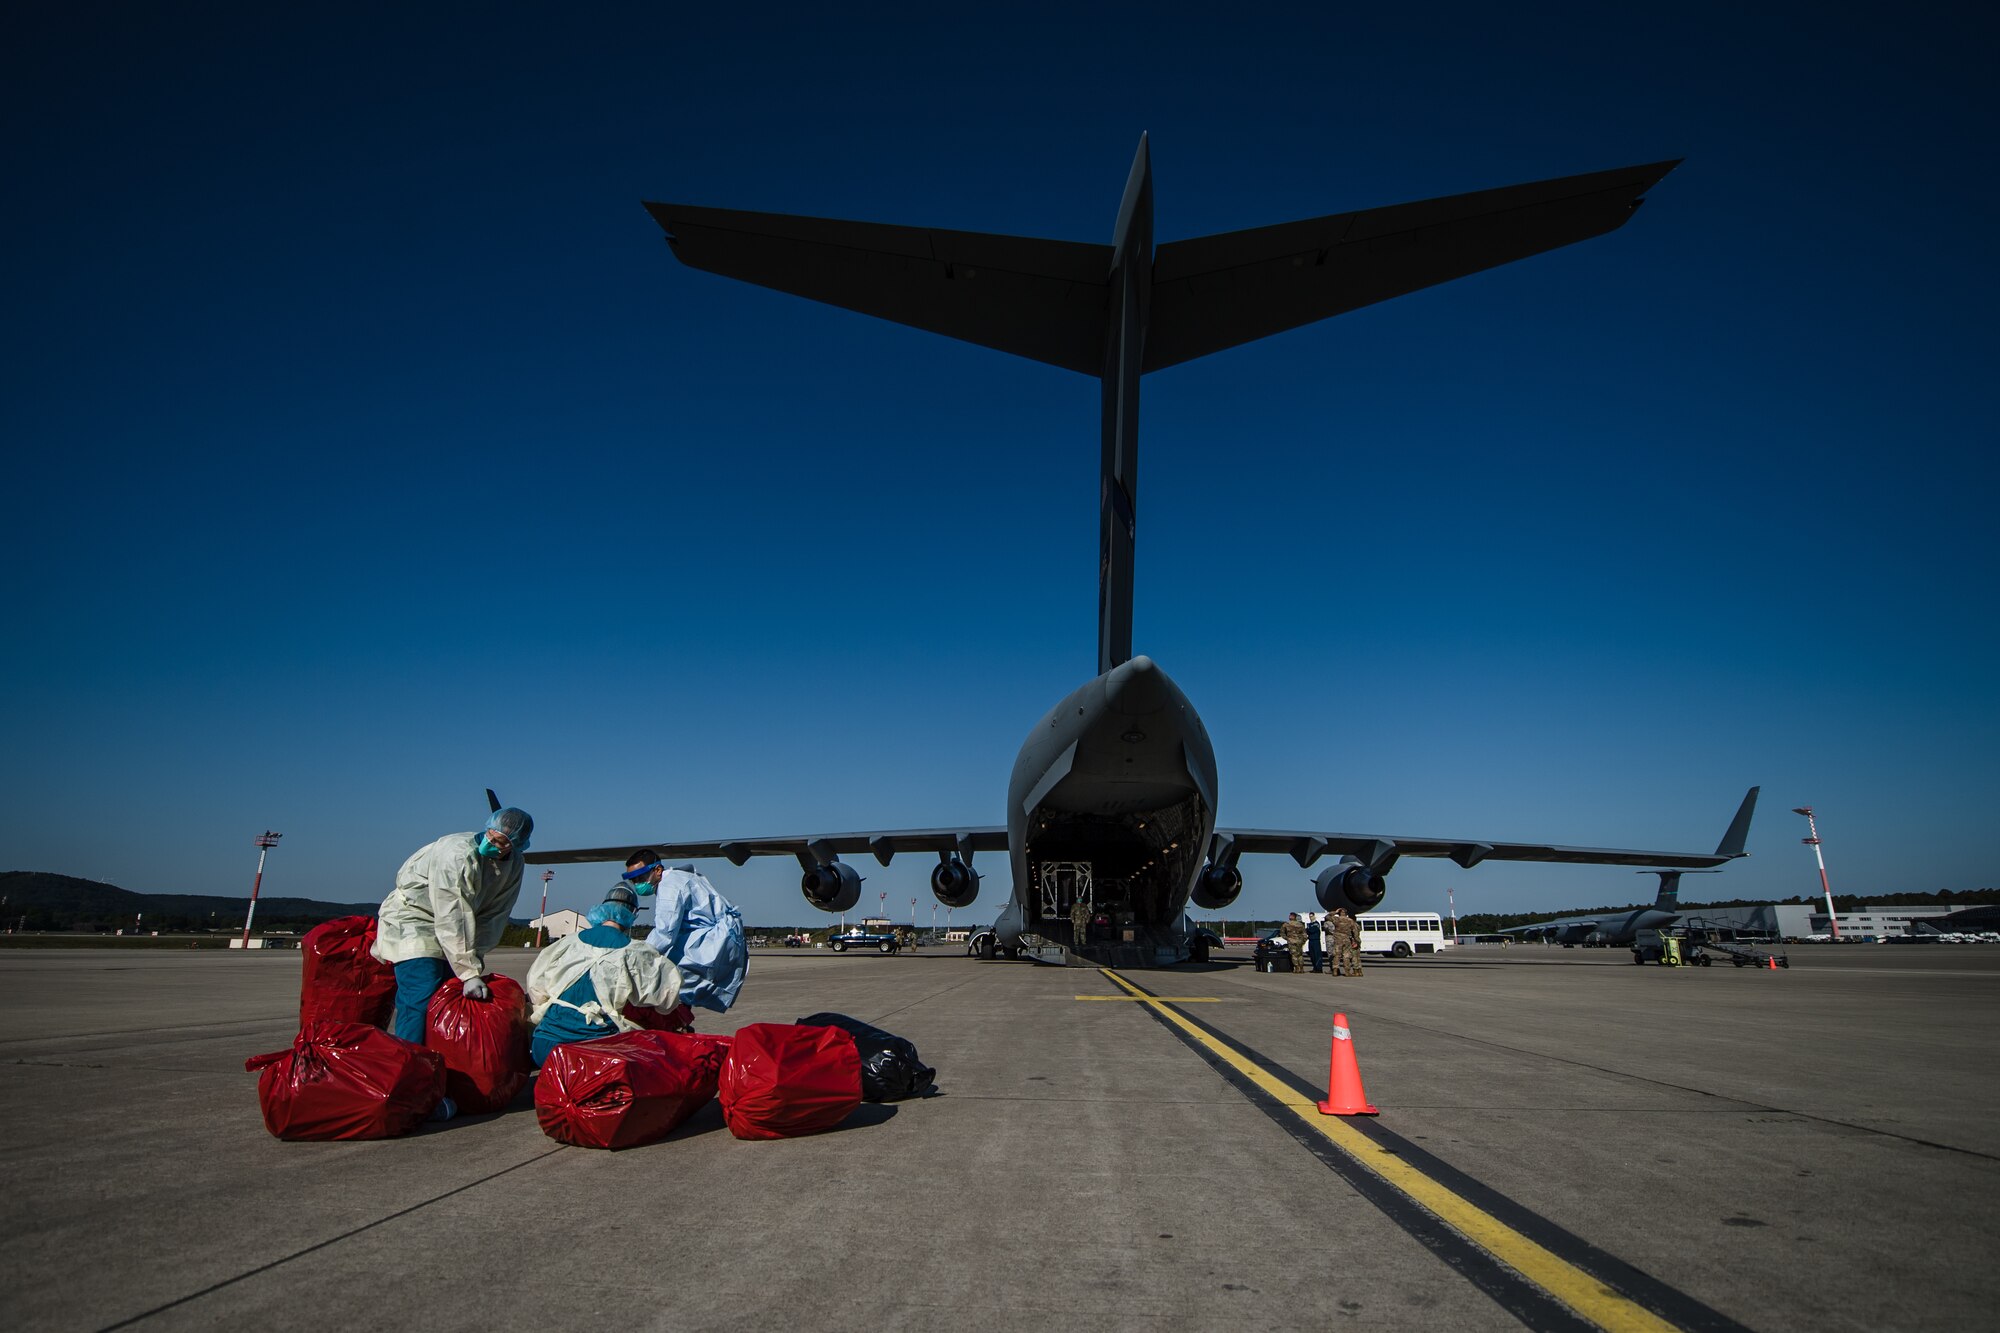 U.S. Airmen assigned to the 313th Expeditionary Operations Support Squadron sort through patients’ belongings at Ramstein Air Base, Germany, May 16, 2020.